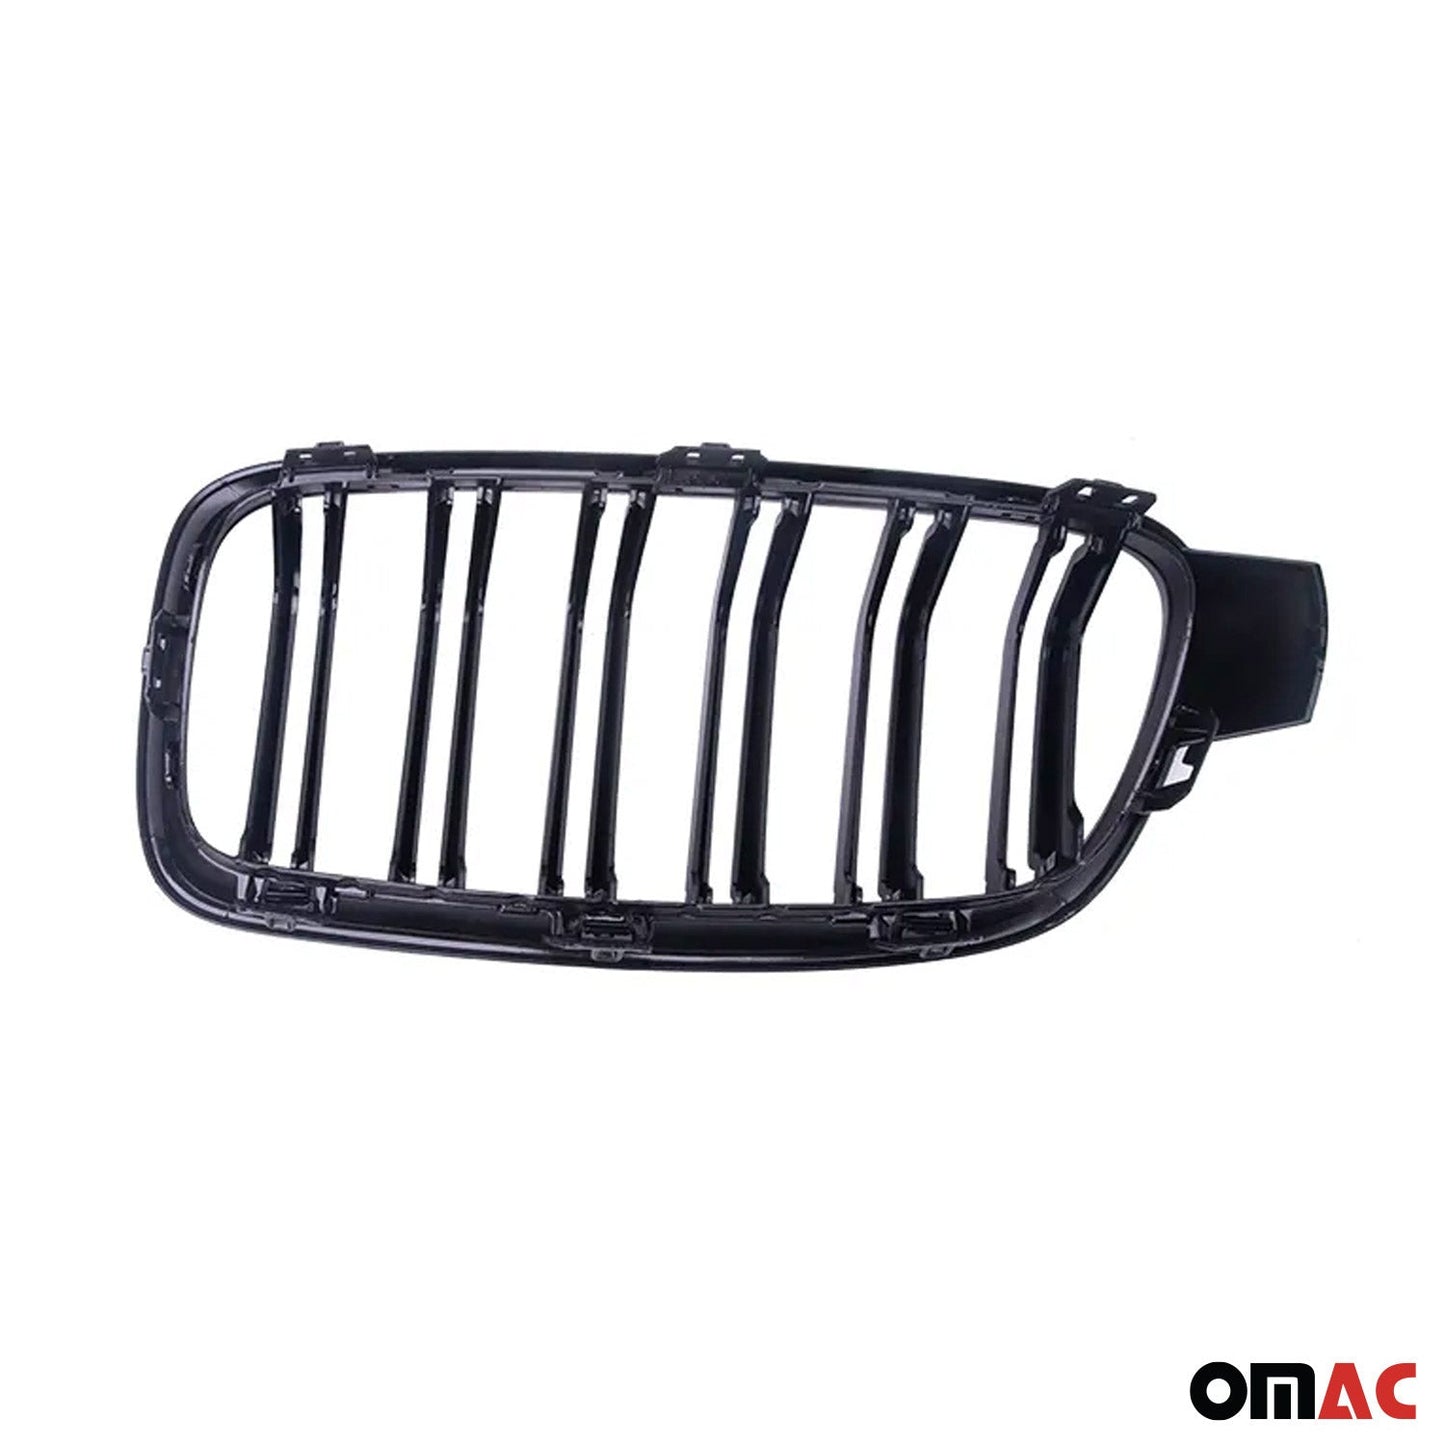 OMAC For BMW 4Series F32 F33 F36 2013-17 M-Tech Style Front Kidney Grille Gloss Black 1226P082MTPB